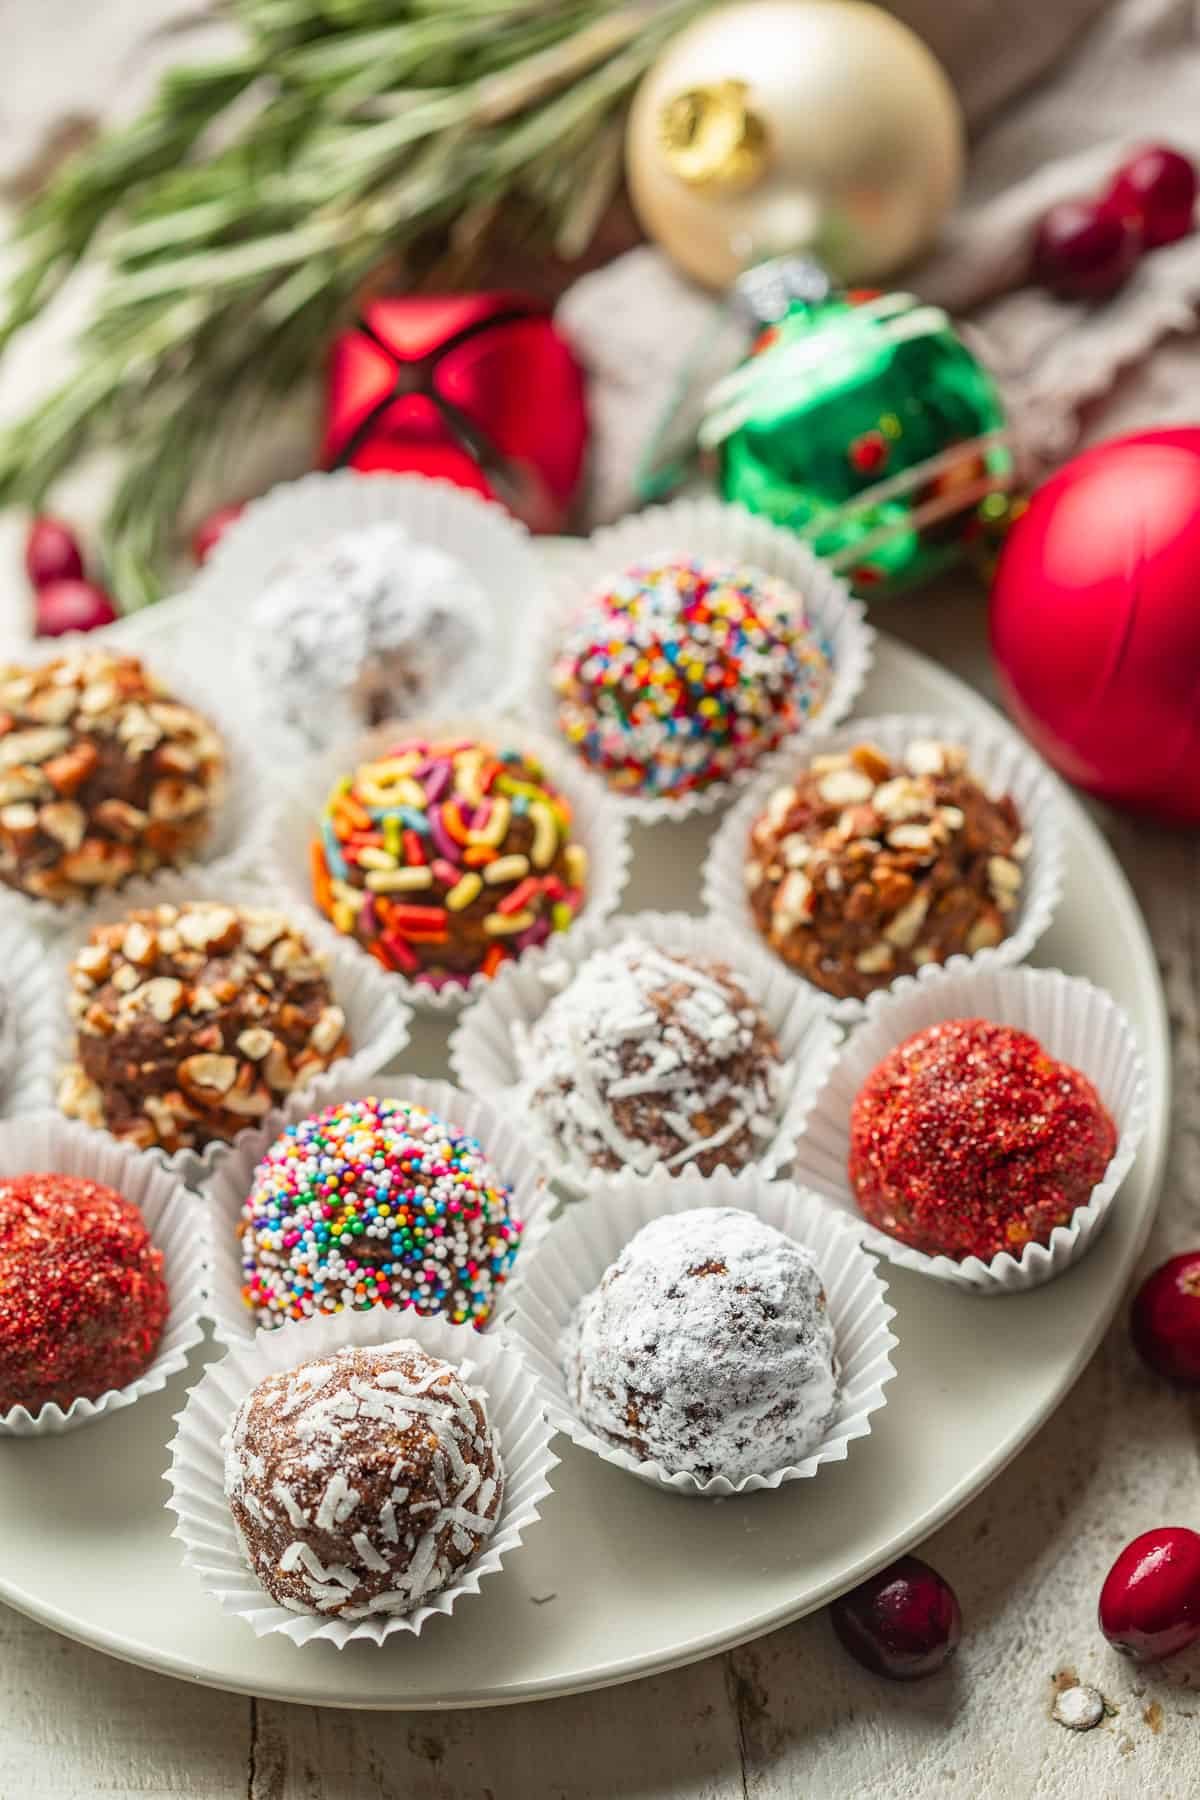 Plate of vegan rum balls with Christmas ornaments in the background.